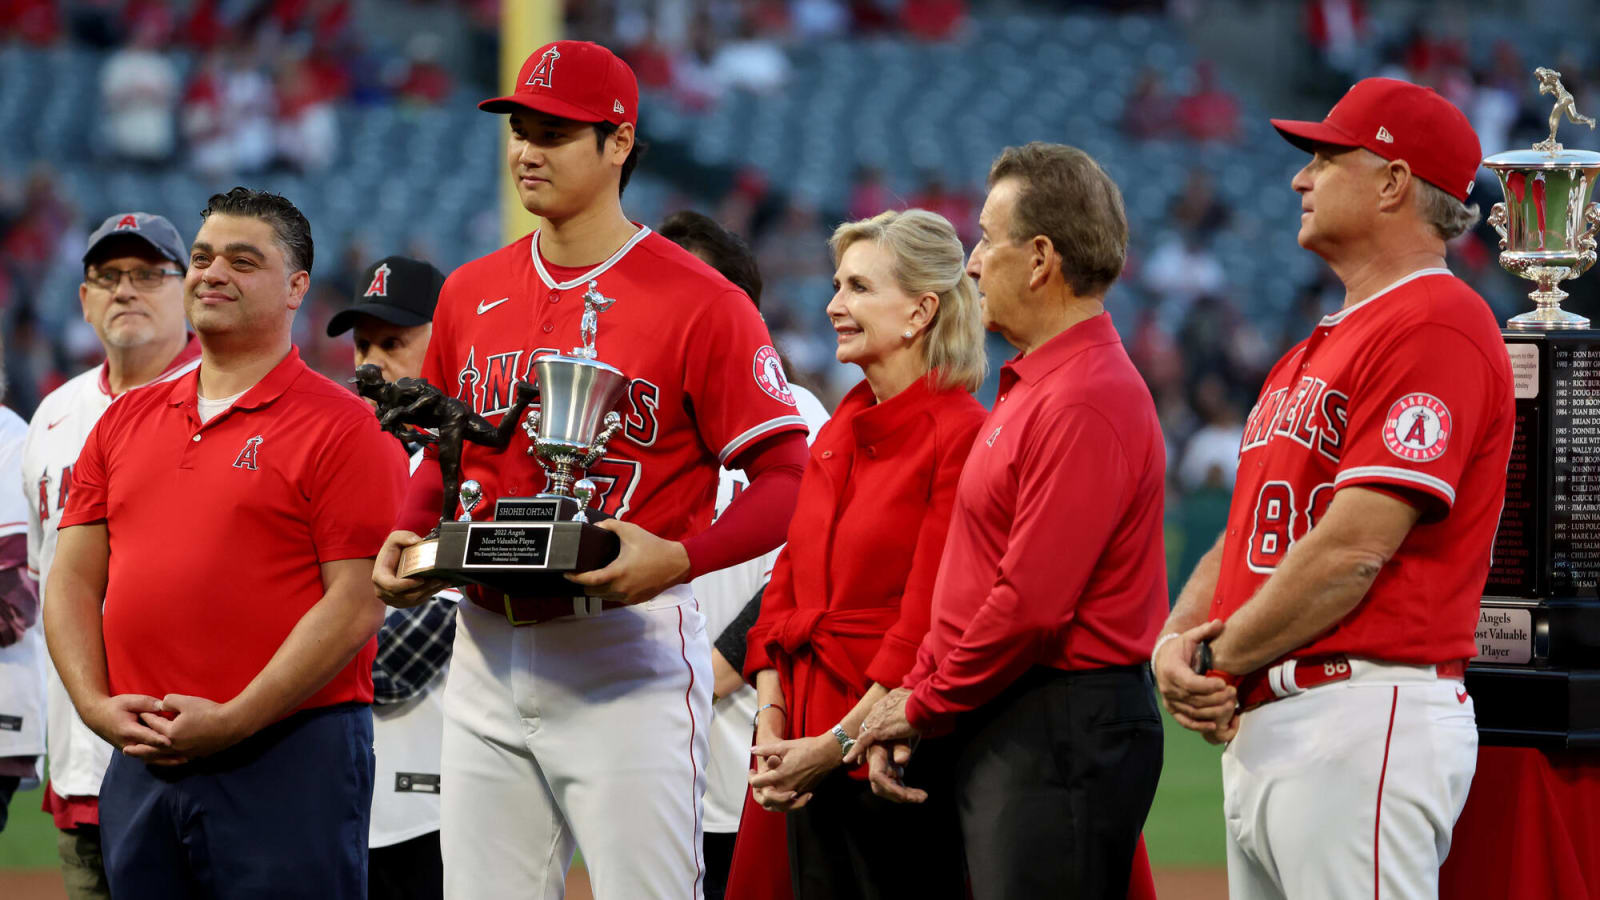 What will Shohei Ohtani’s next contract look like?